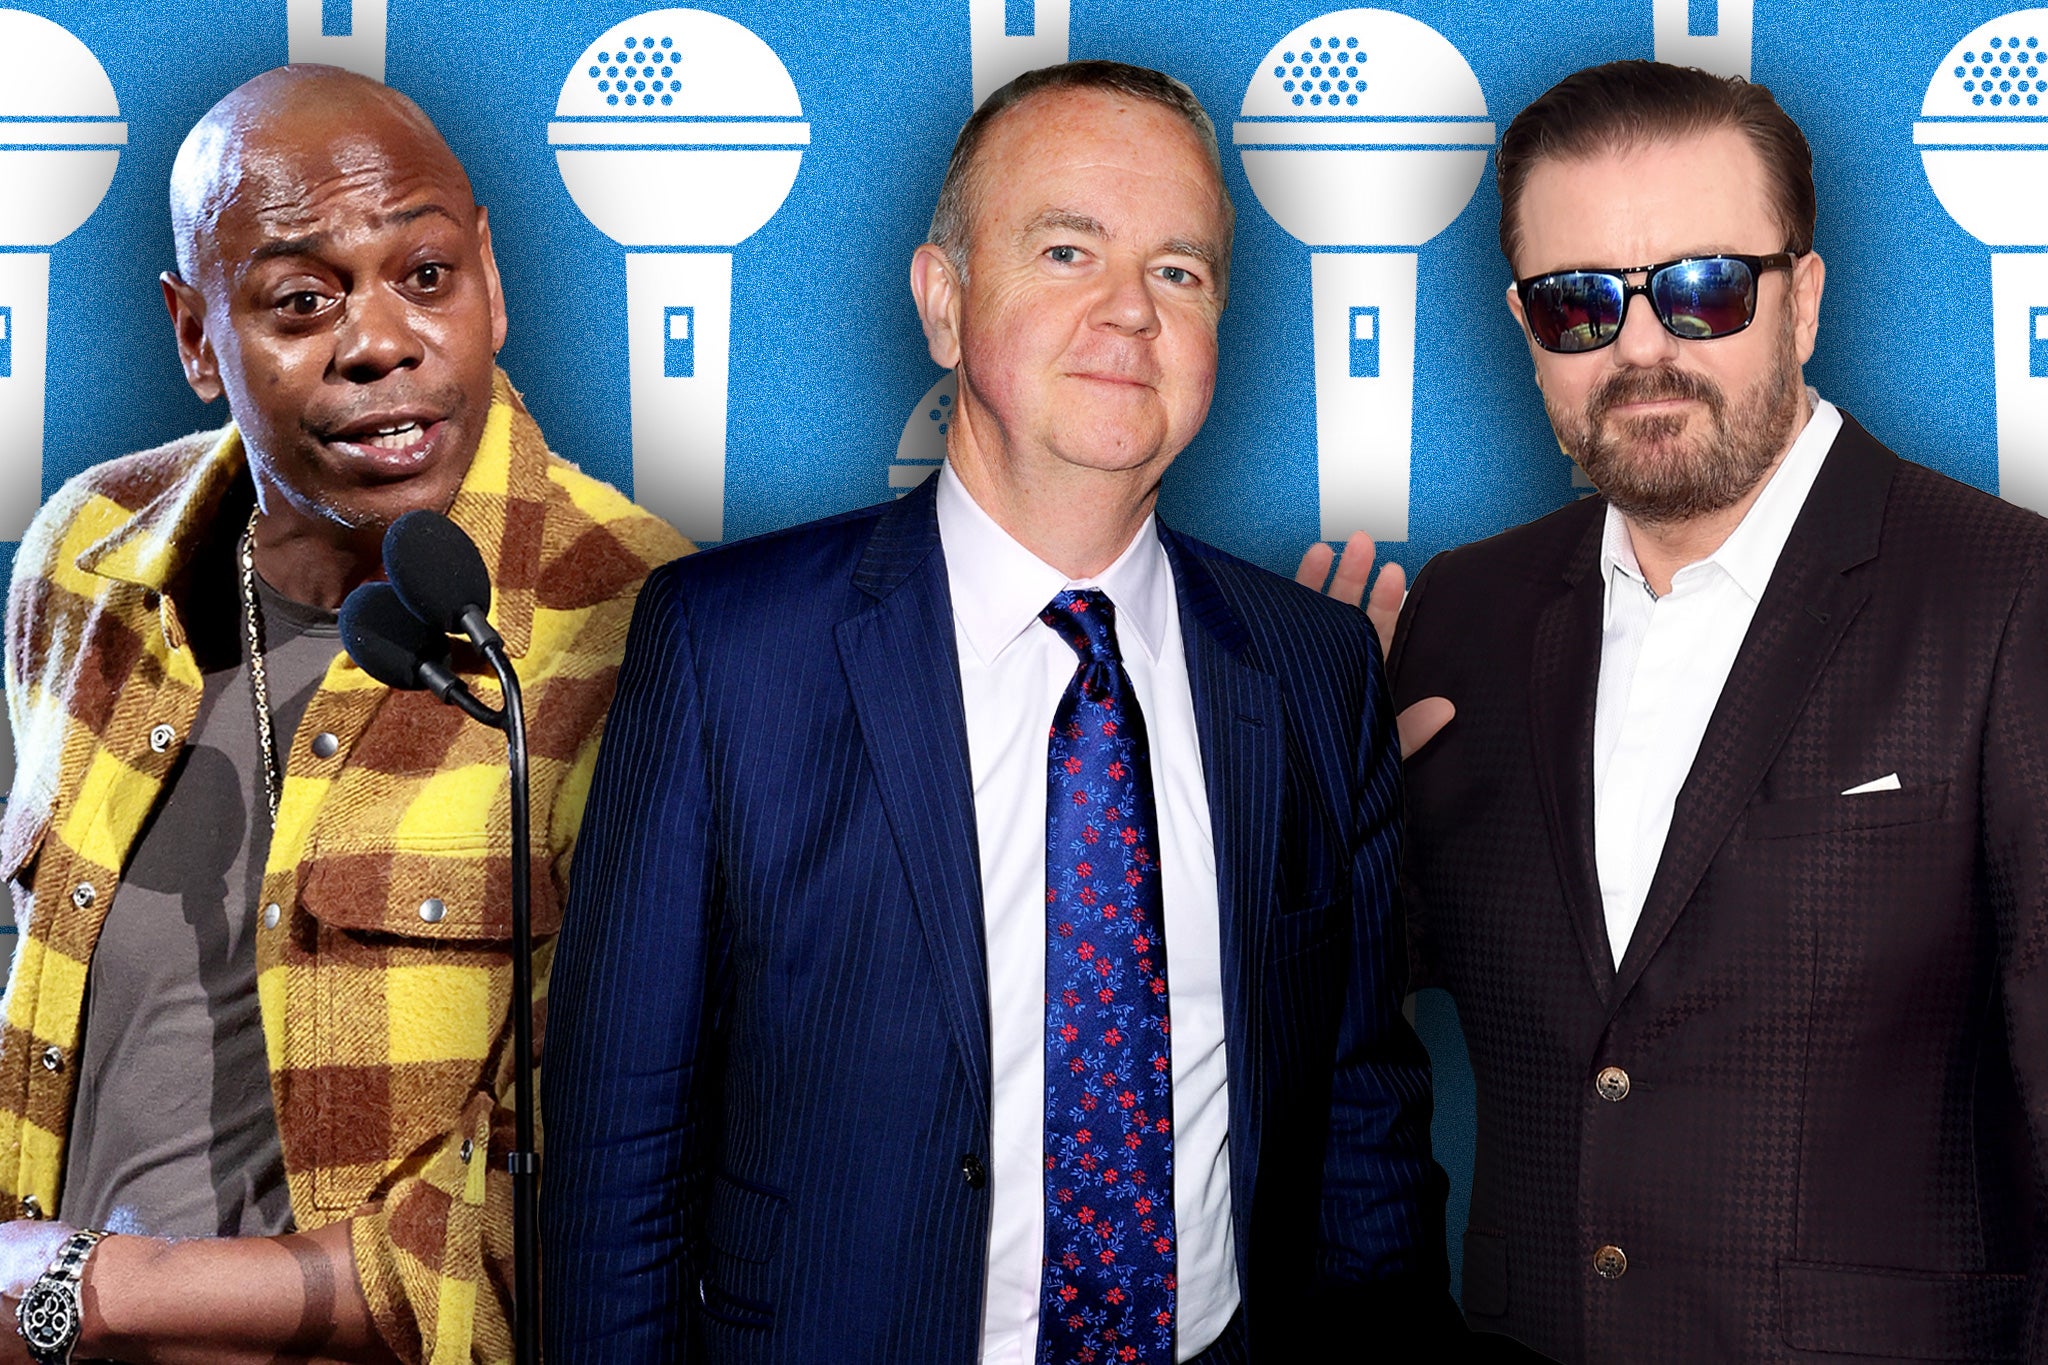 From left: Dave Chappelle, Ian Hislop and Ricky Gervais